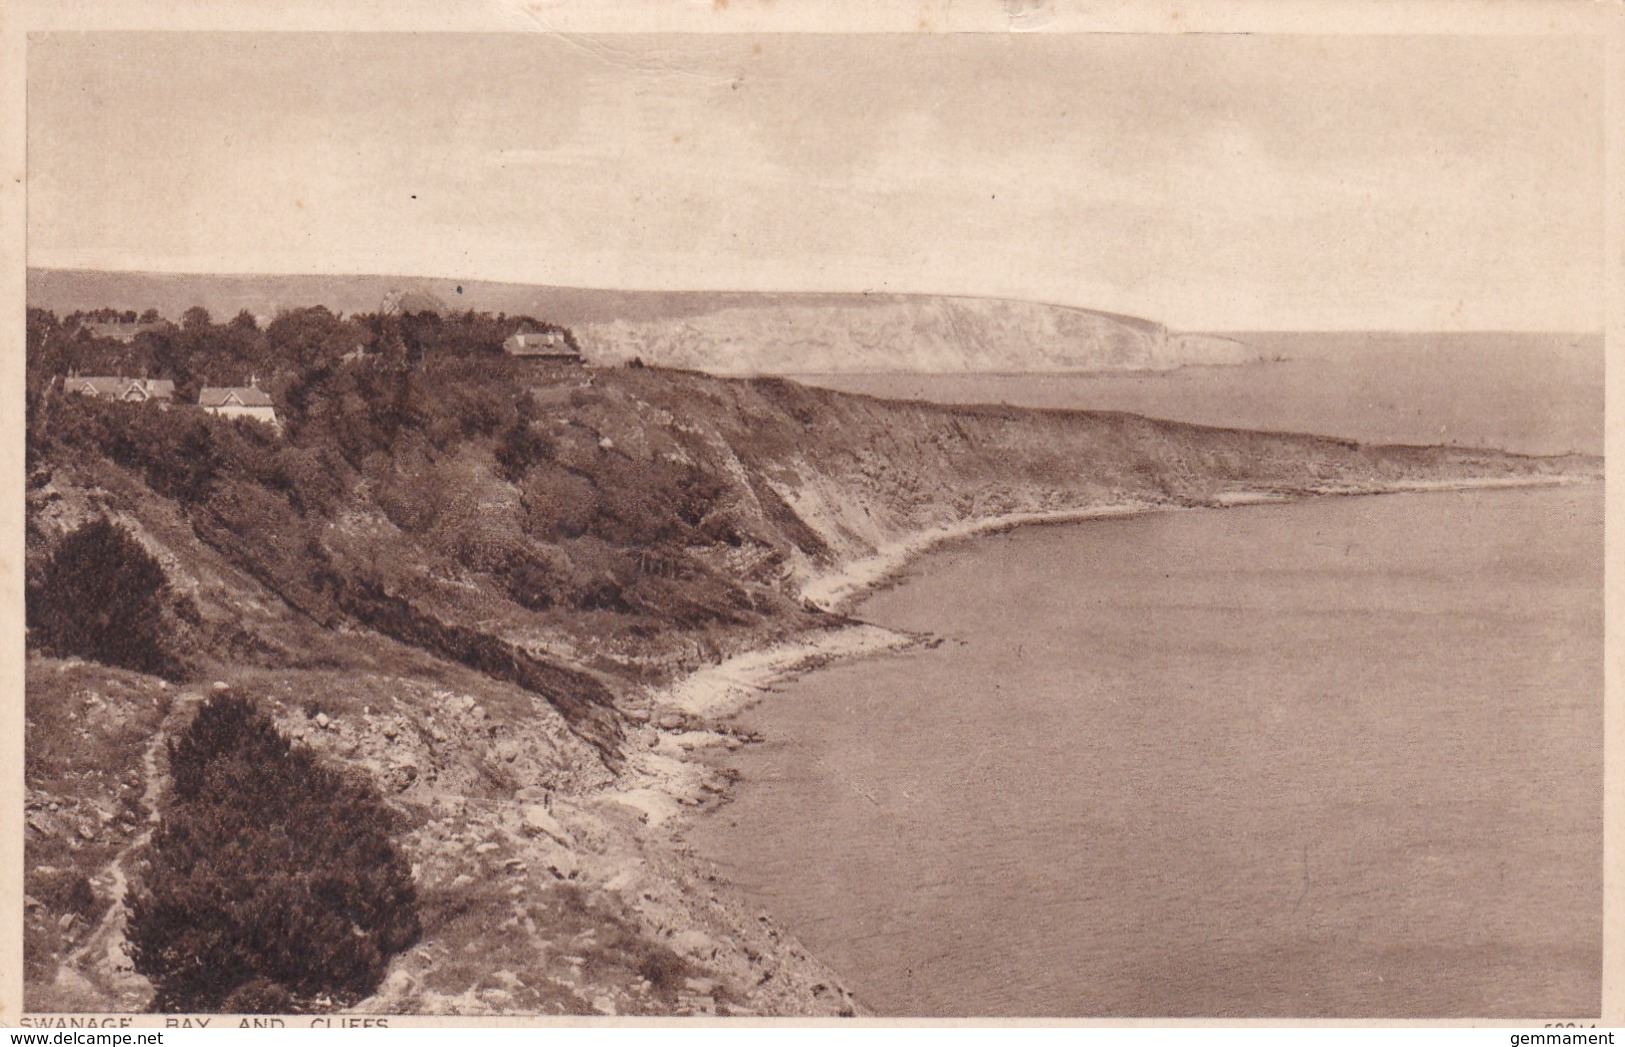 SWANAGE BAY AND CLIFFS - Swanage